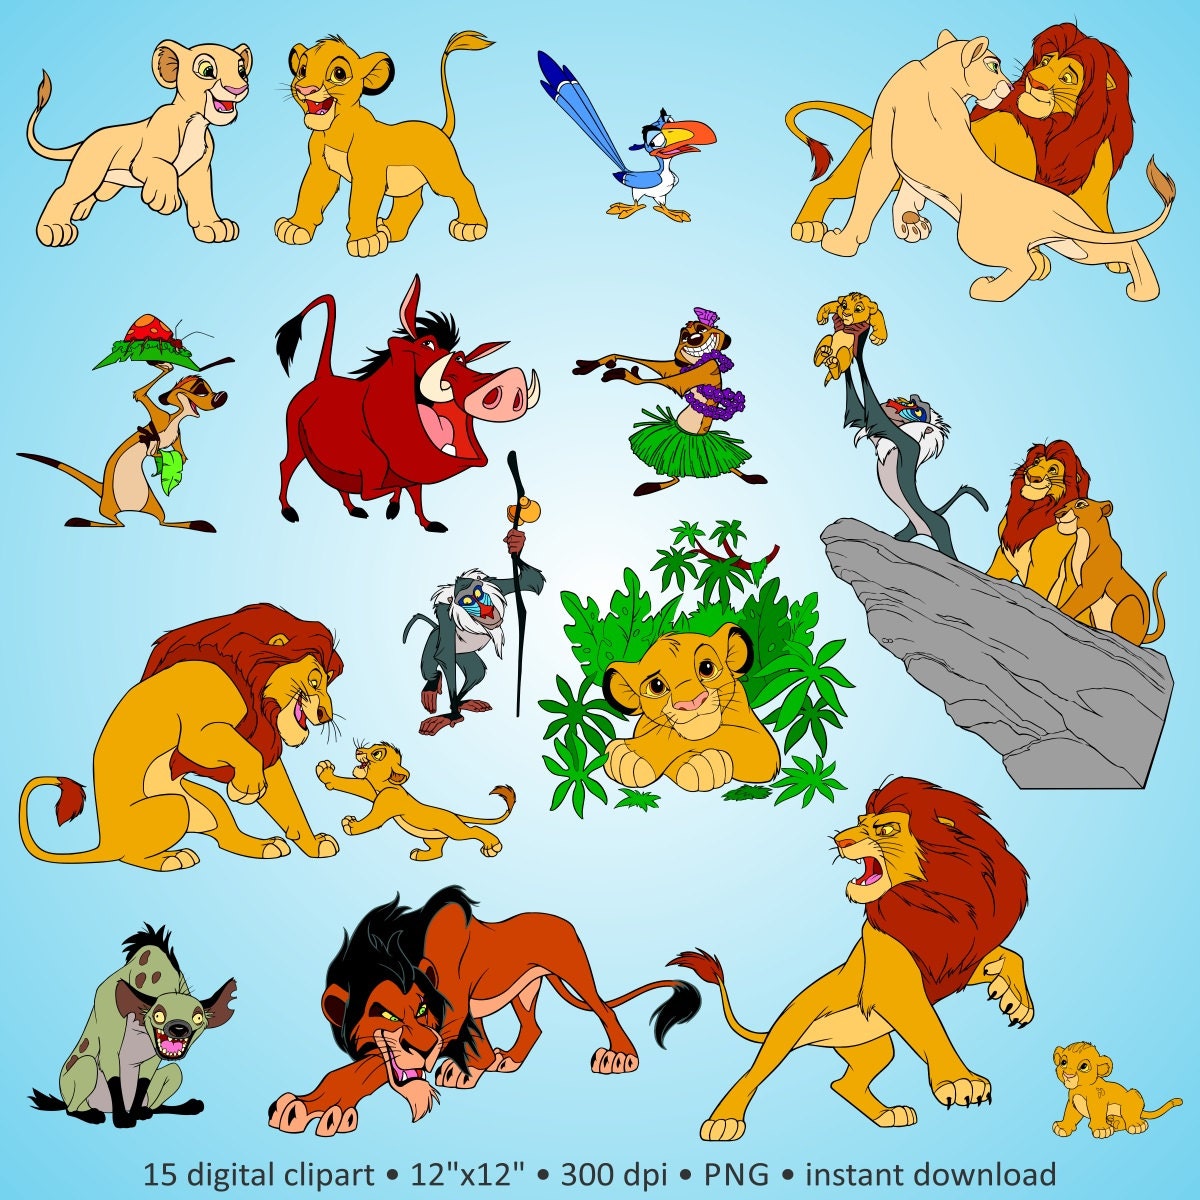 Buy 2 Get 1 Free Digital Clipart The Lion King